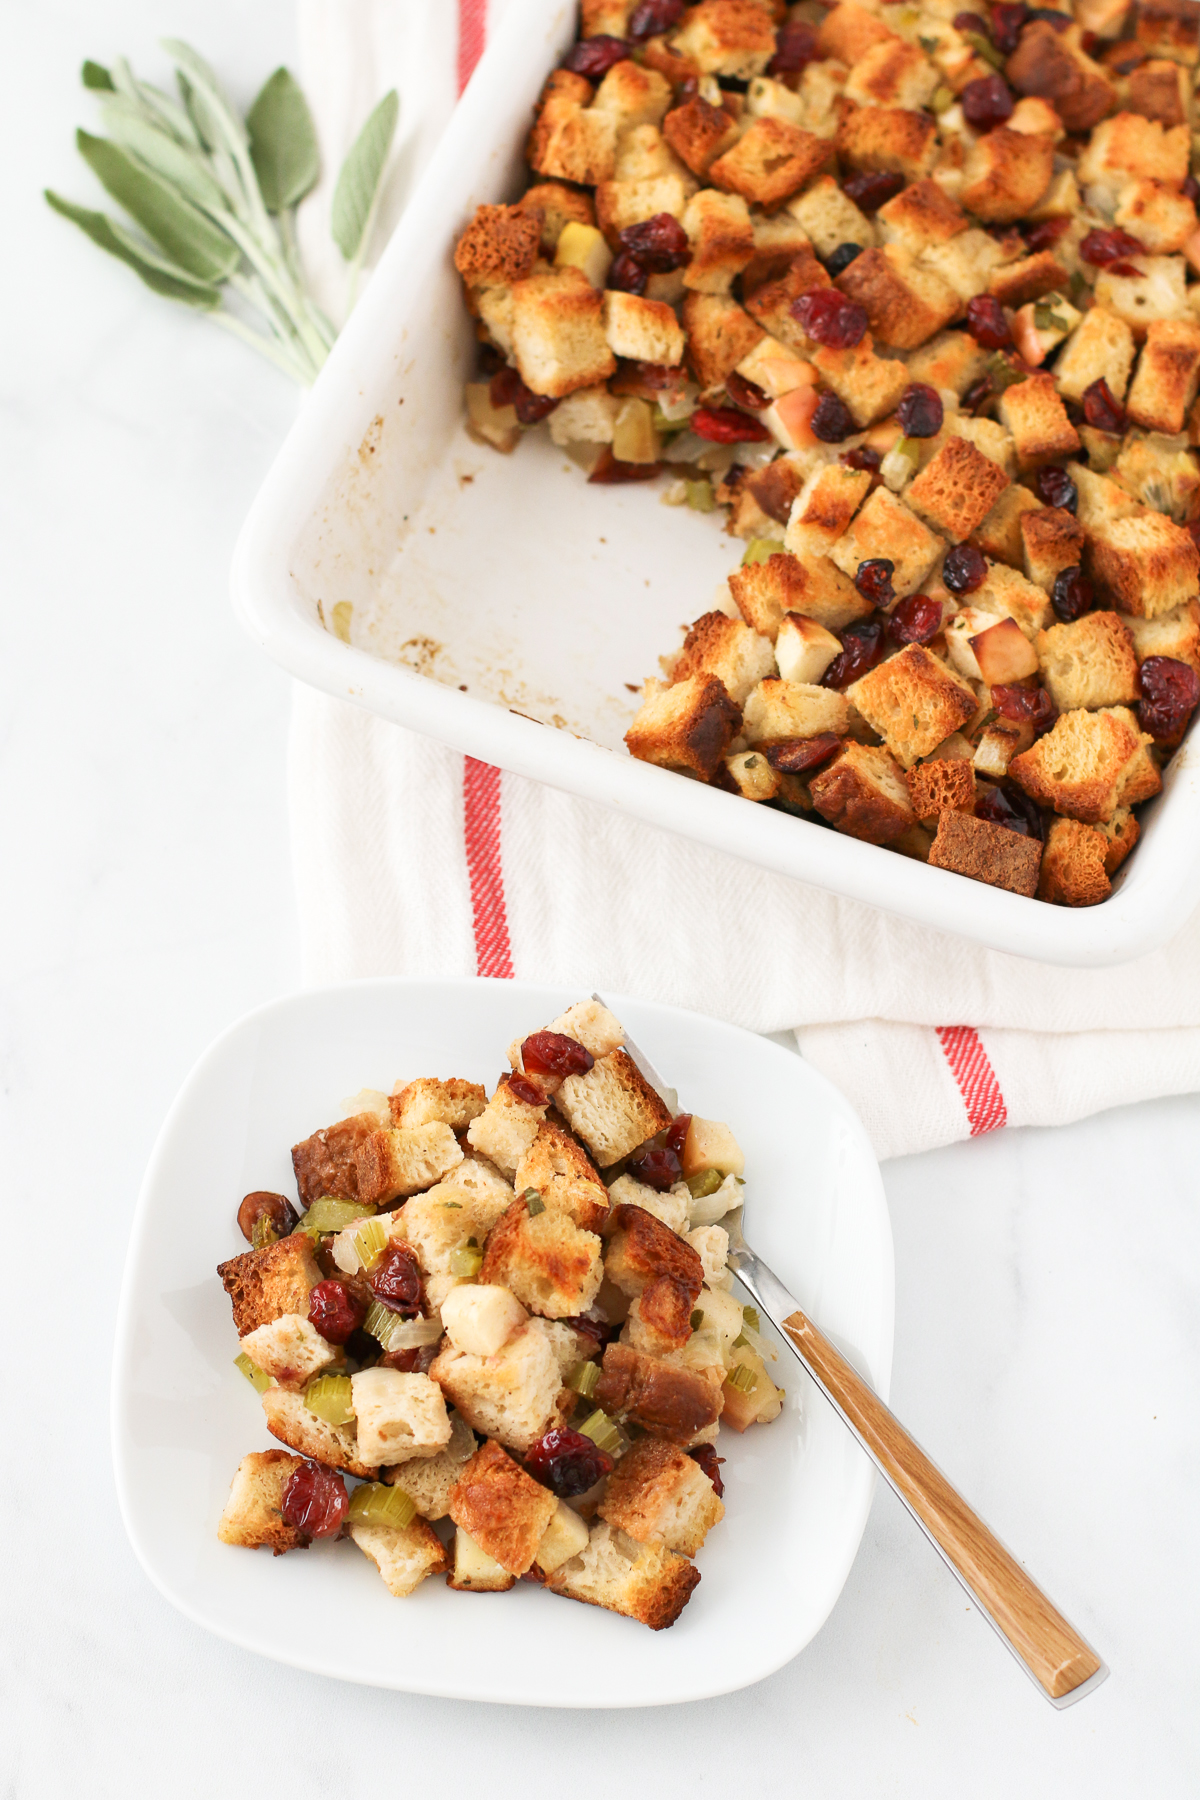 Gluten Free Apple Cranberry Stuffing. This sweet and savory stuffing is sure to be a hit on your Thanksgiving table!